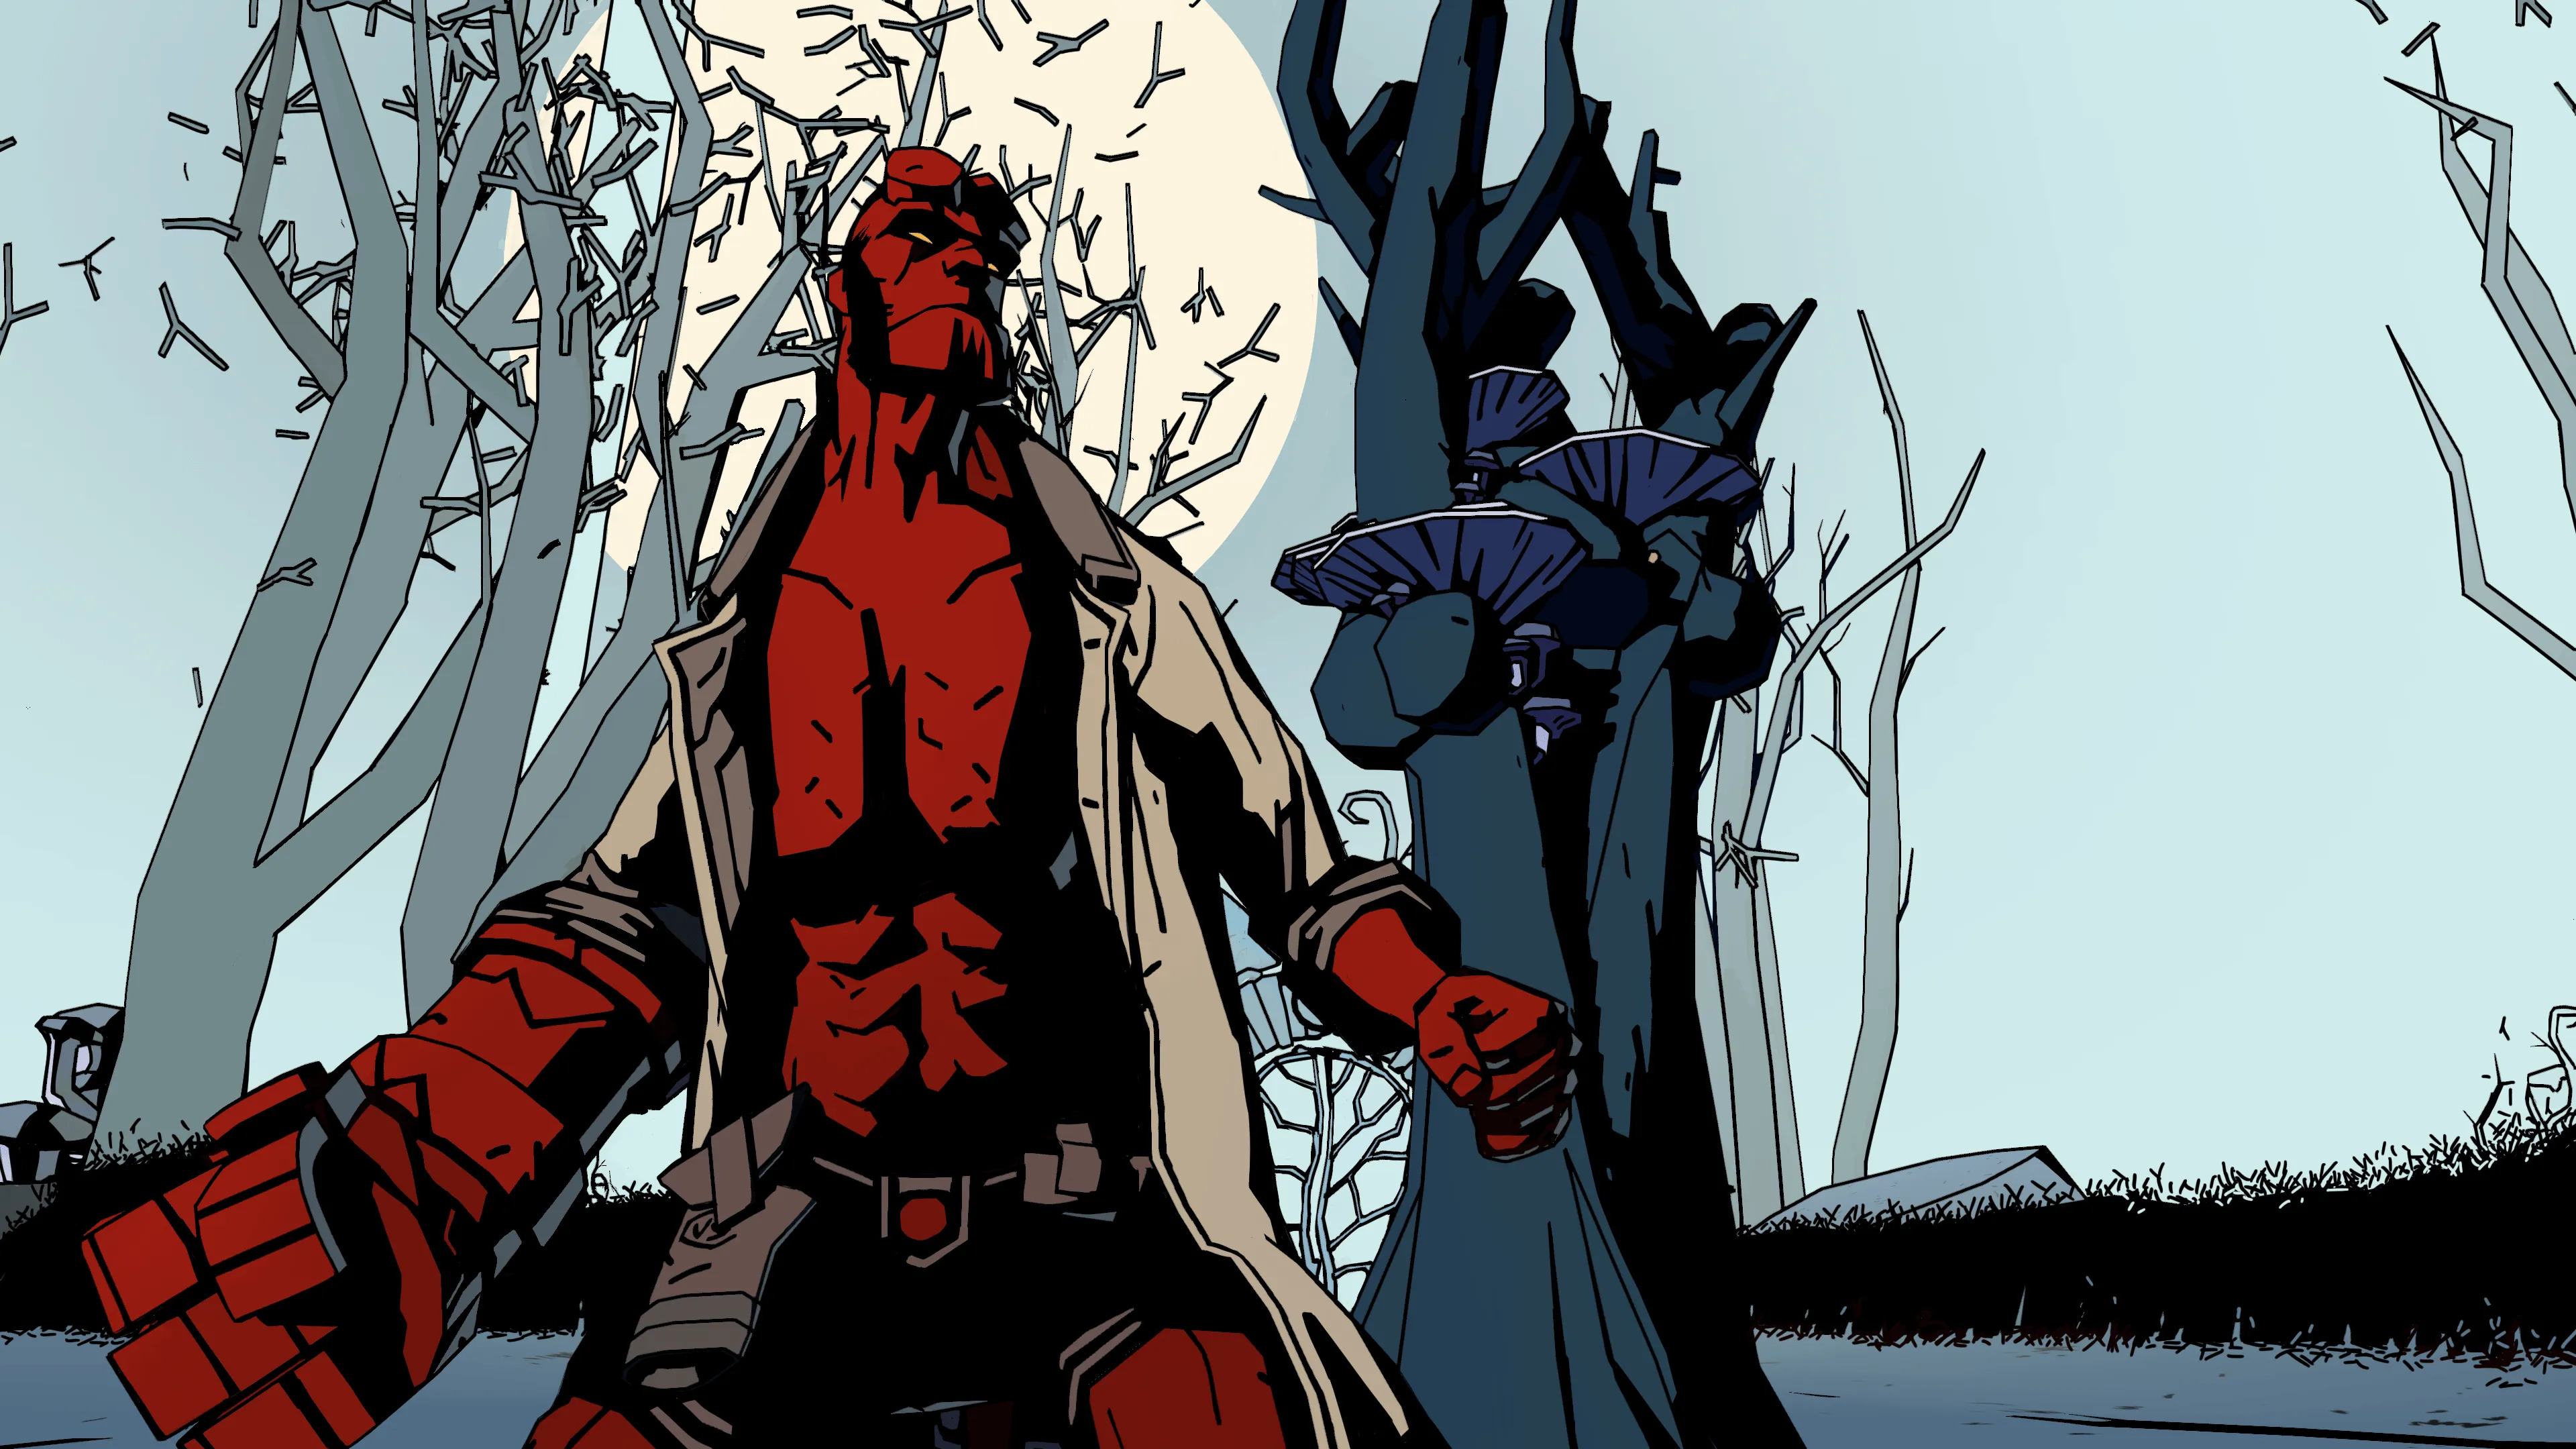 Hellboy standing in a forest in Hellboy Web of Wryd.